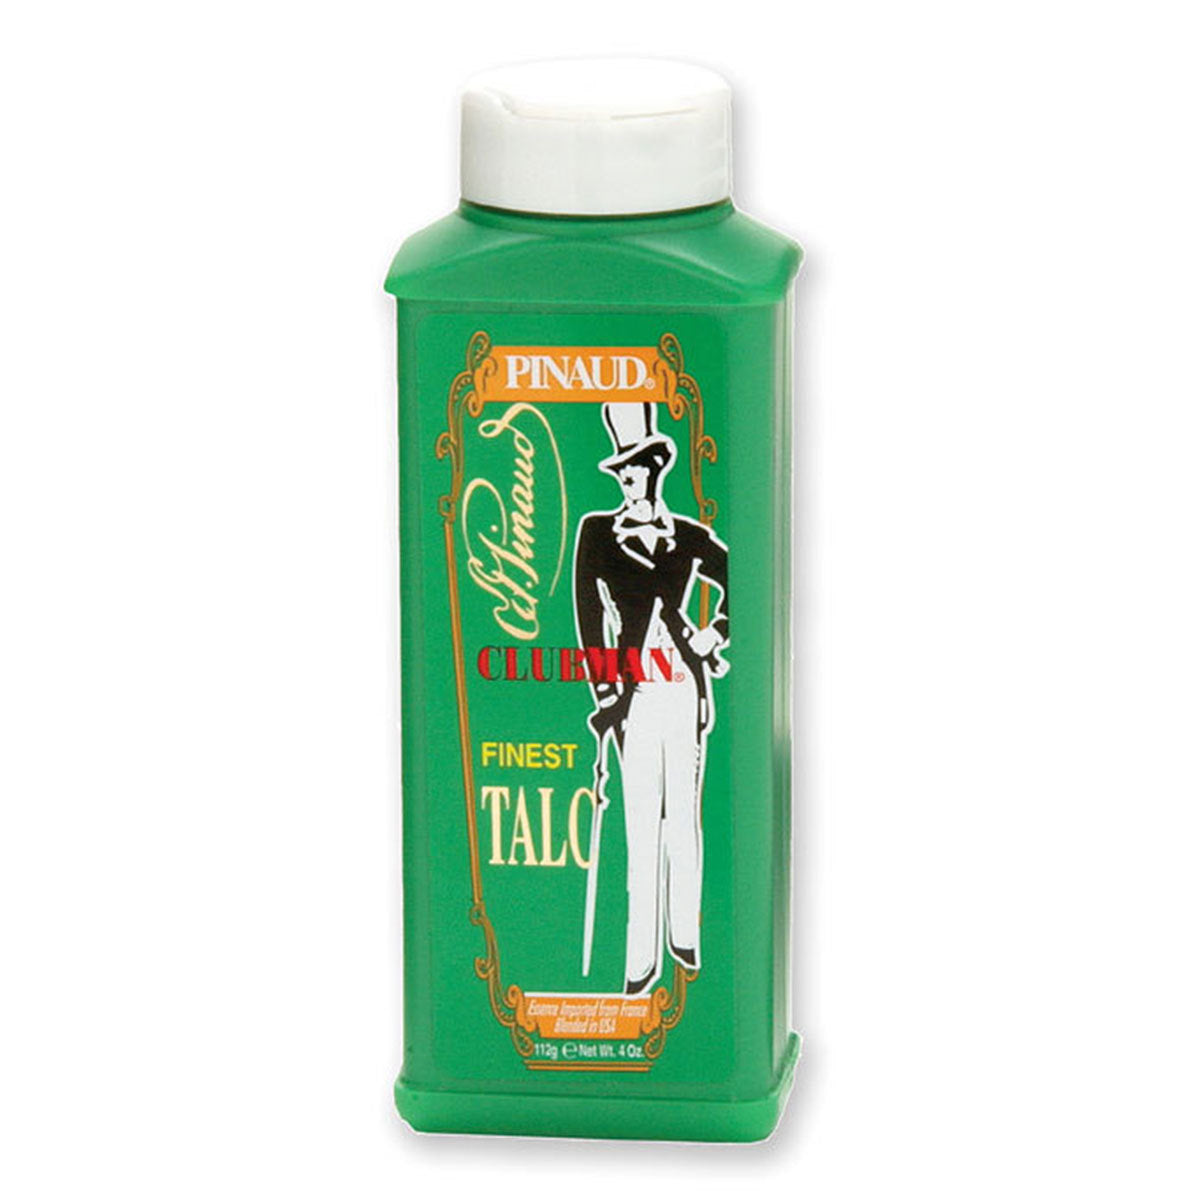 Primary image of Clubman Talc White